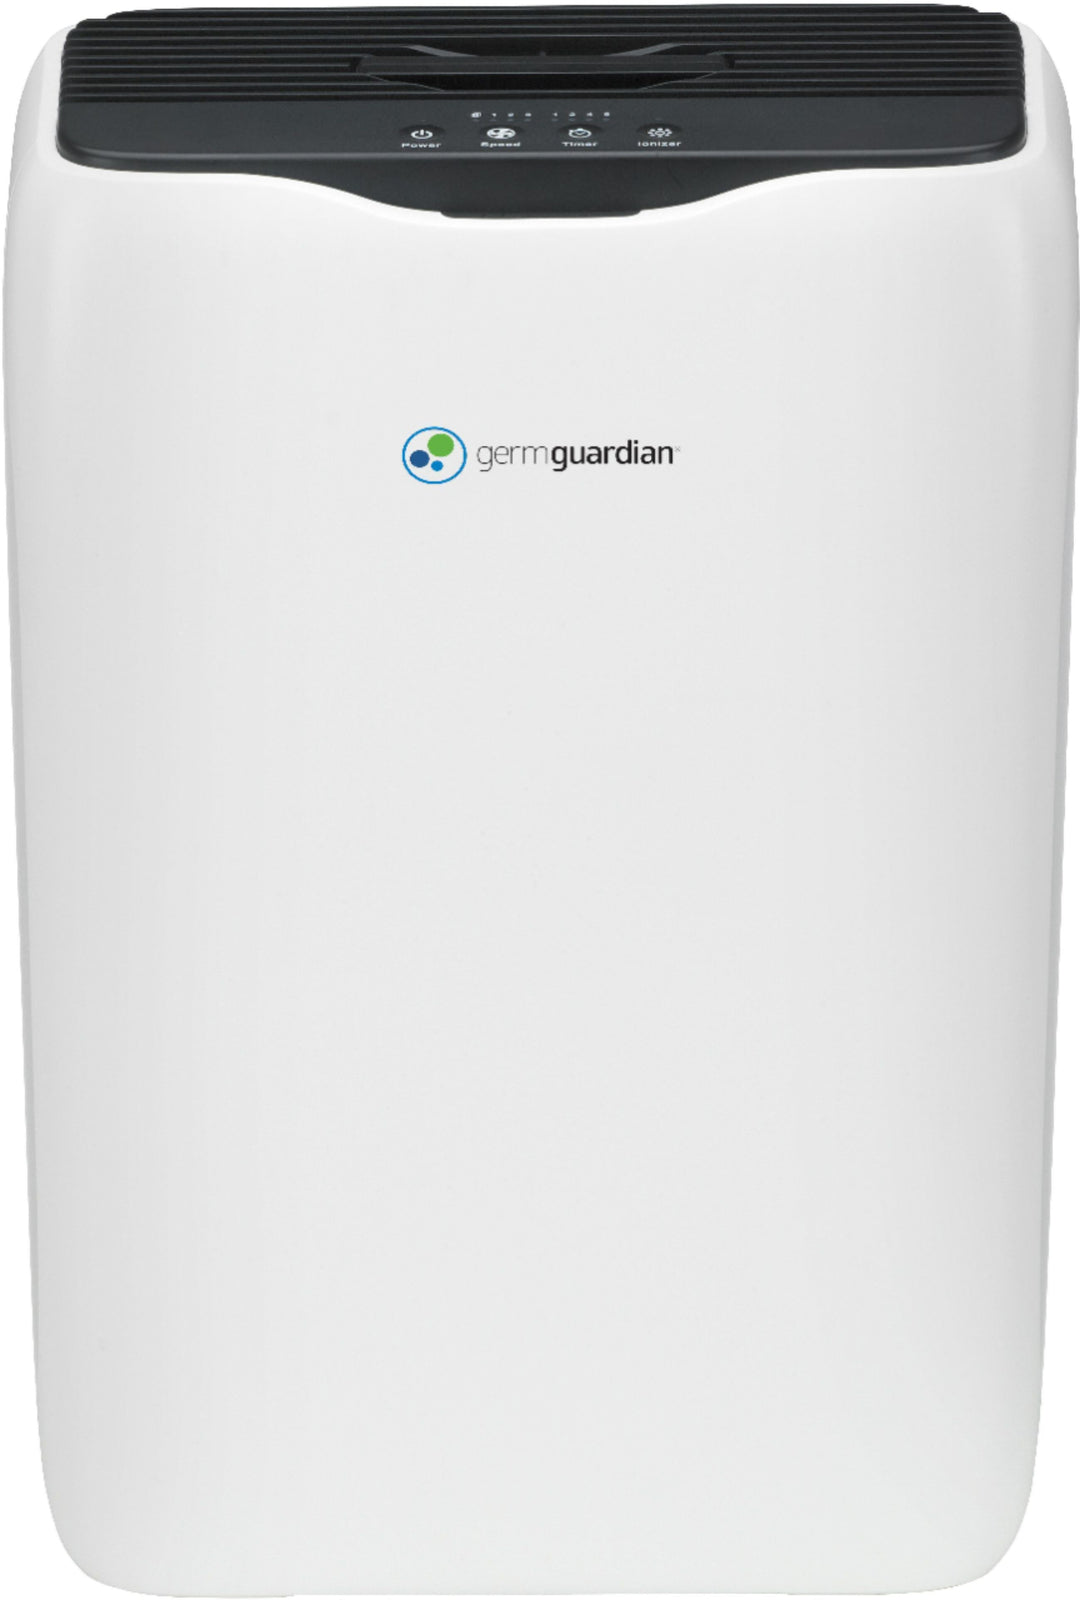 GermGuardian - 151 Sq. Ft Console Air Purifier - White_14